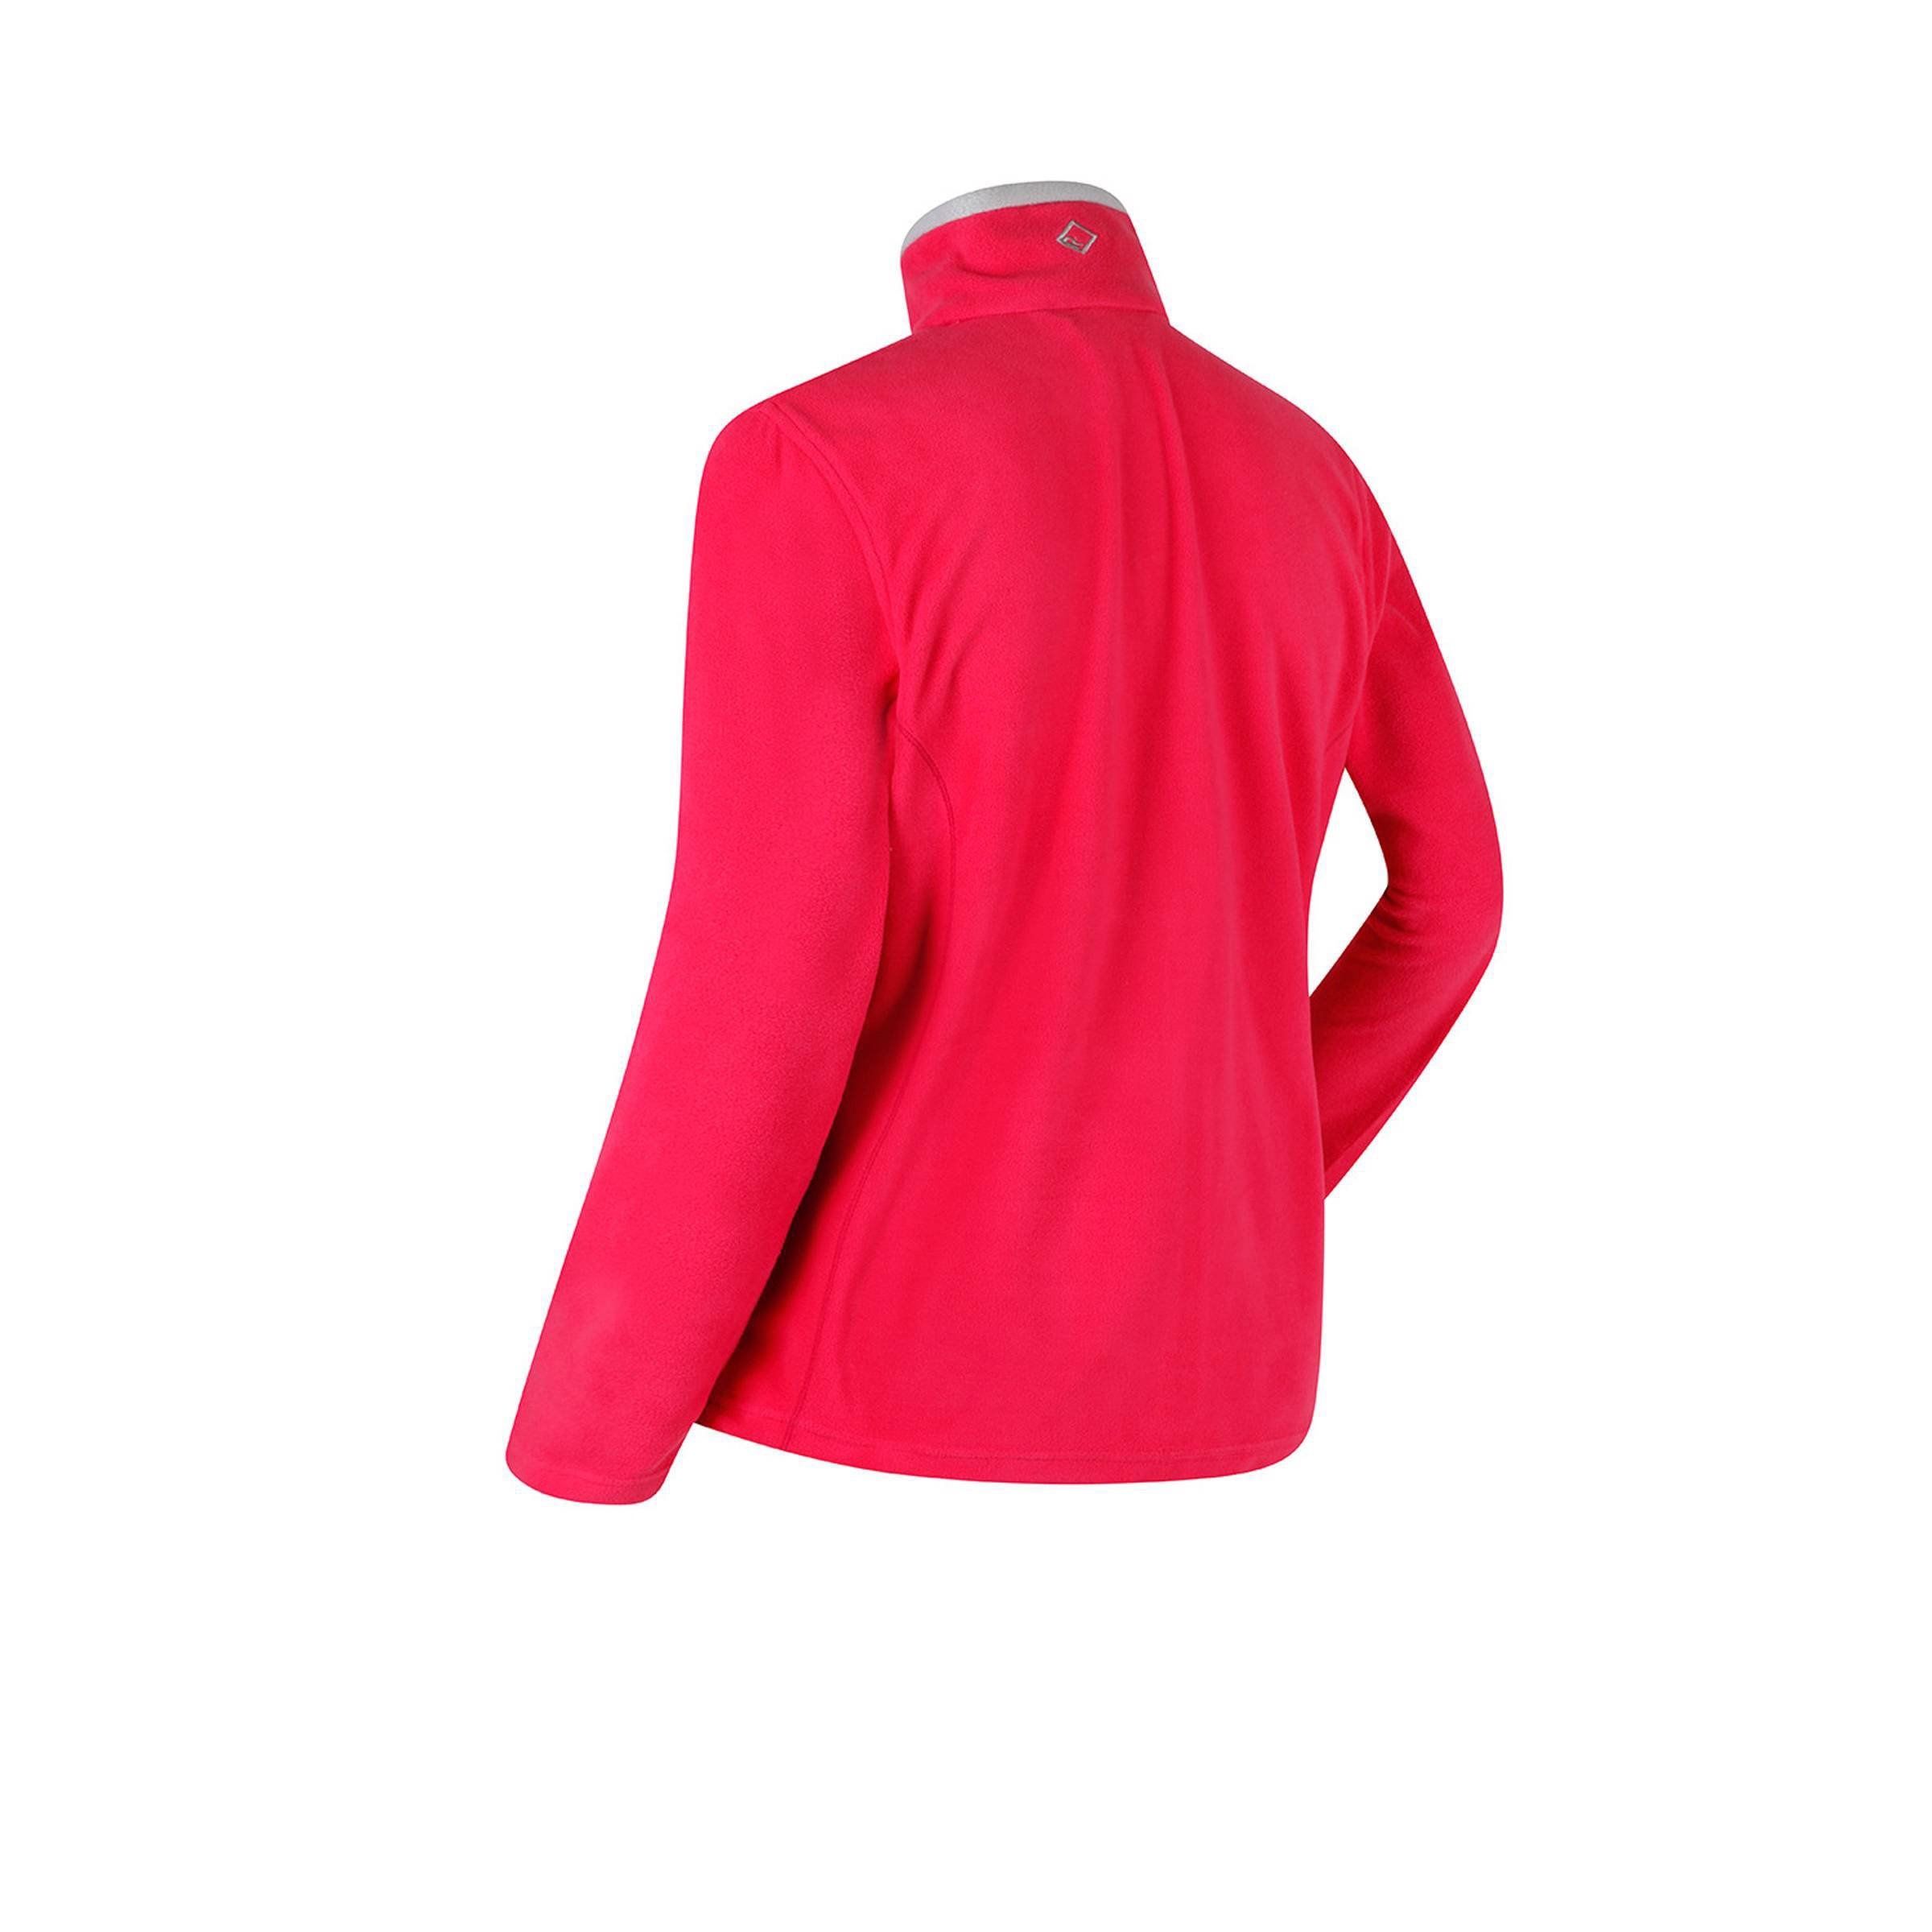 The womens Clemance II is our incredibly soft and warm mid-weight Symmetry fleece jacket cut with flattering curved seams and a colour pop detail around the neck. Contrasting inner collar with brightly coloured stripe. It has a shock cord hem to seal in the warmth. It works equally well as a stand-alone on milder days or layered under mountain jackets in winter months. 100% Polyester. Regatta Womens sizing (bust approx): 6 (30in/76cm), 8 (32in/81cm), 10 (34in/86cm), 12 (36in/92cm), 14 (38in/97cm), 16 (40in/102cm), 18 (43in/109cm), 20 (45in/114cm), 22 (48in/122cm), 24 (50in/127cm), 26 (52in/132cm), 28 (54in/137cm), 30 (56in/142cm), 32 (58in/147cm), 34 (60in/152cm), 36 (62in/158cm).